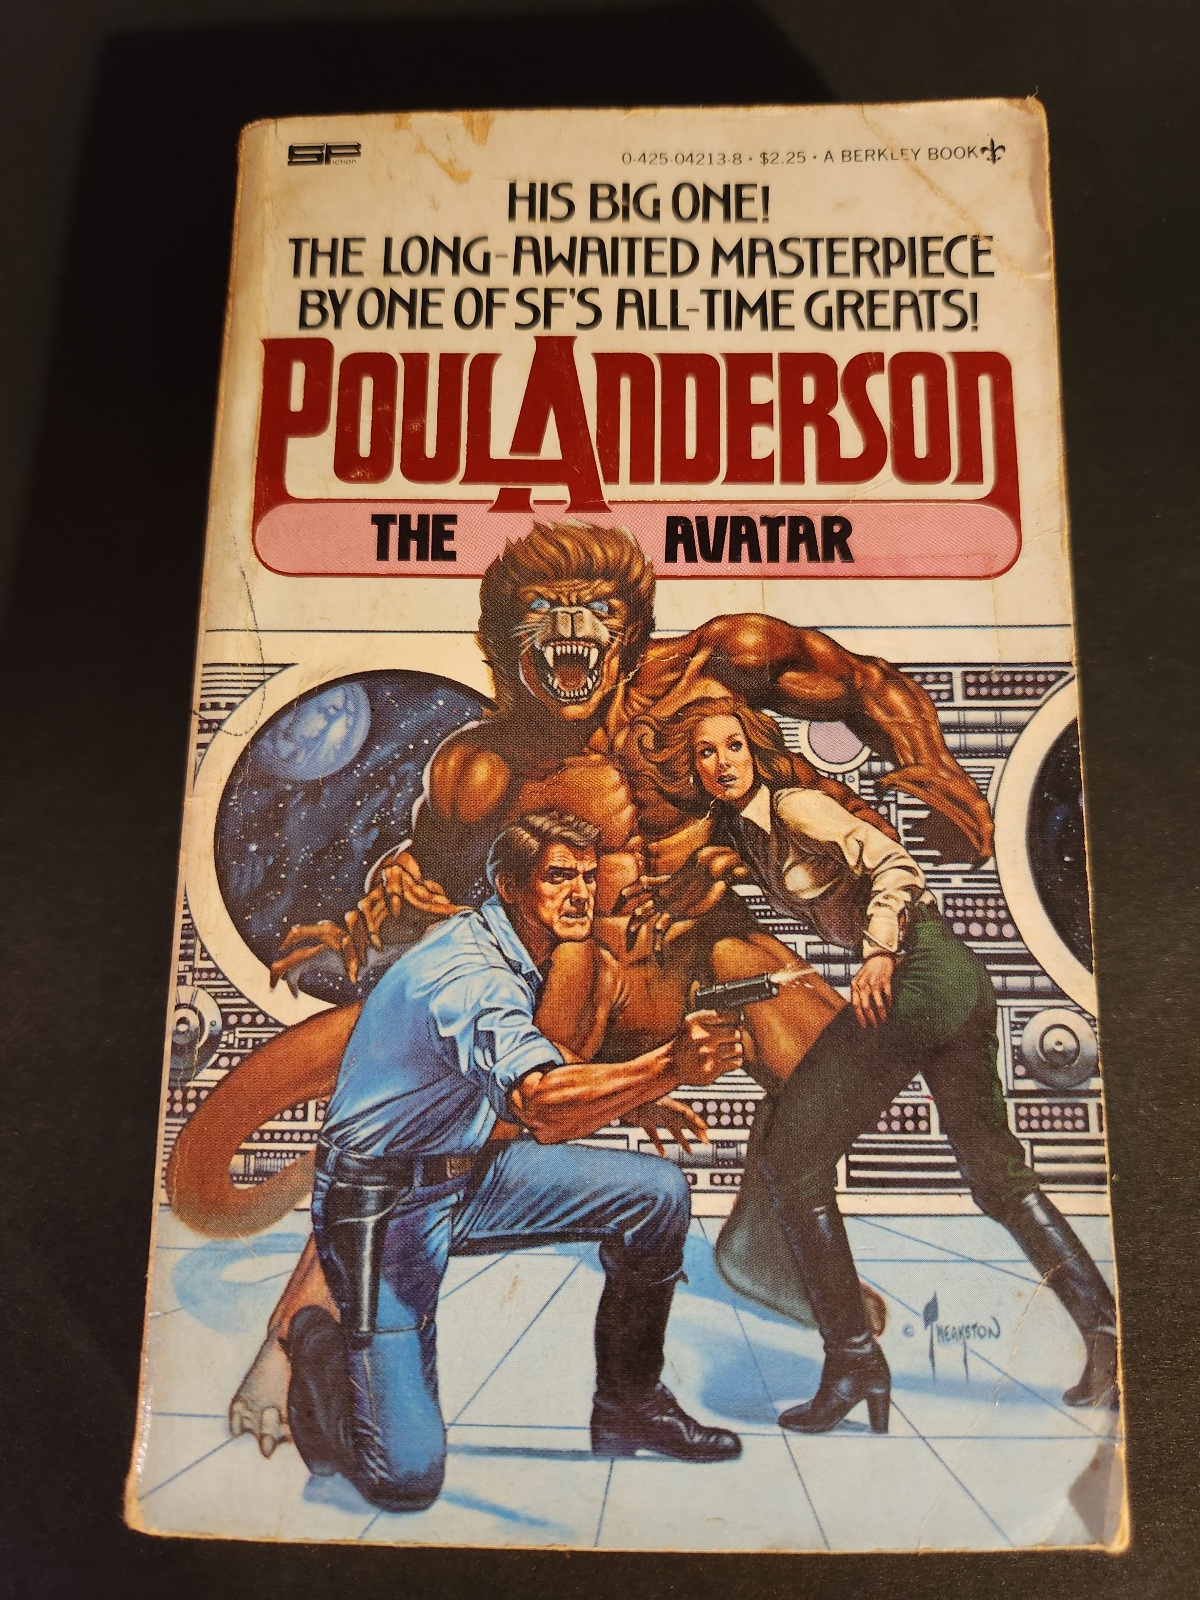 The Avatar by Poul Anderson 1979